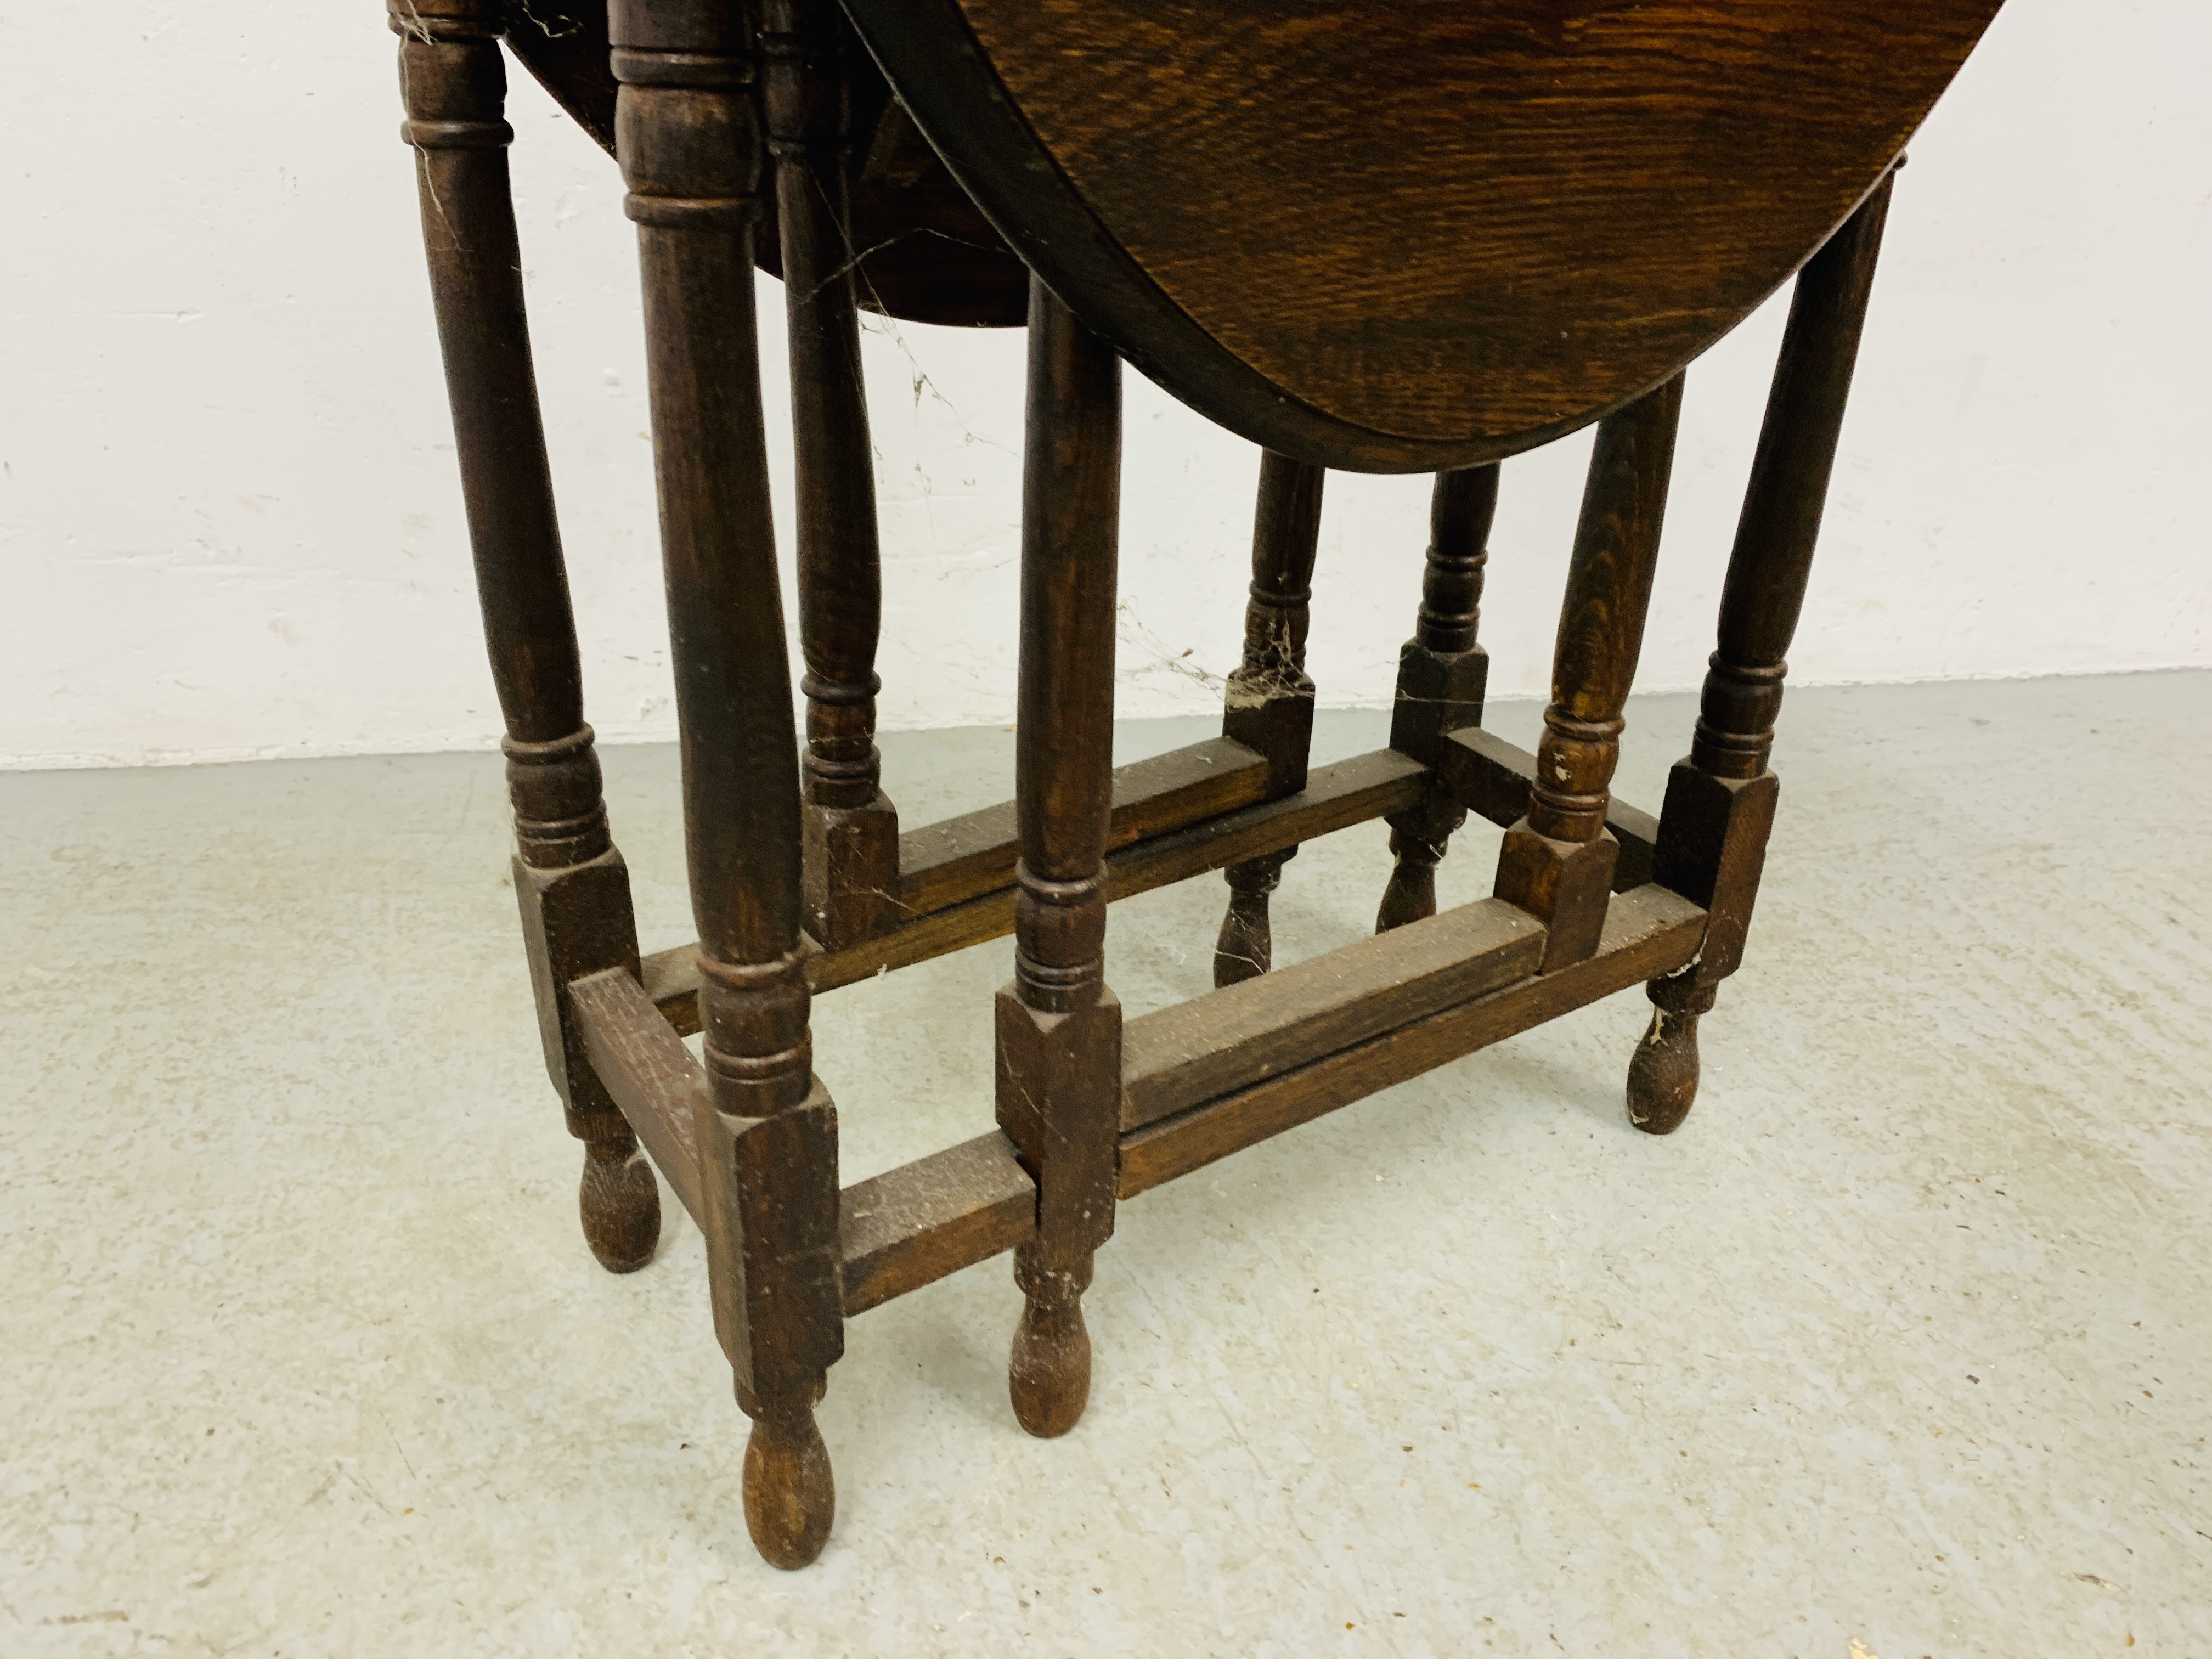 EARLY 20th CENTURY SMALL OAK DROP LEAF TABLE ON TURNED LEGS - H 72CM. W 60CM. - Image 4 of 5